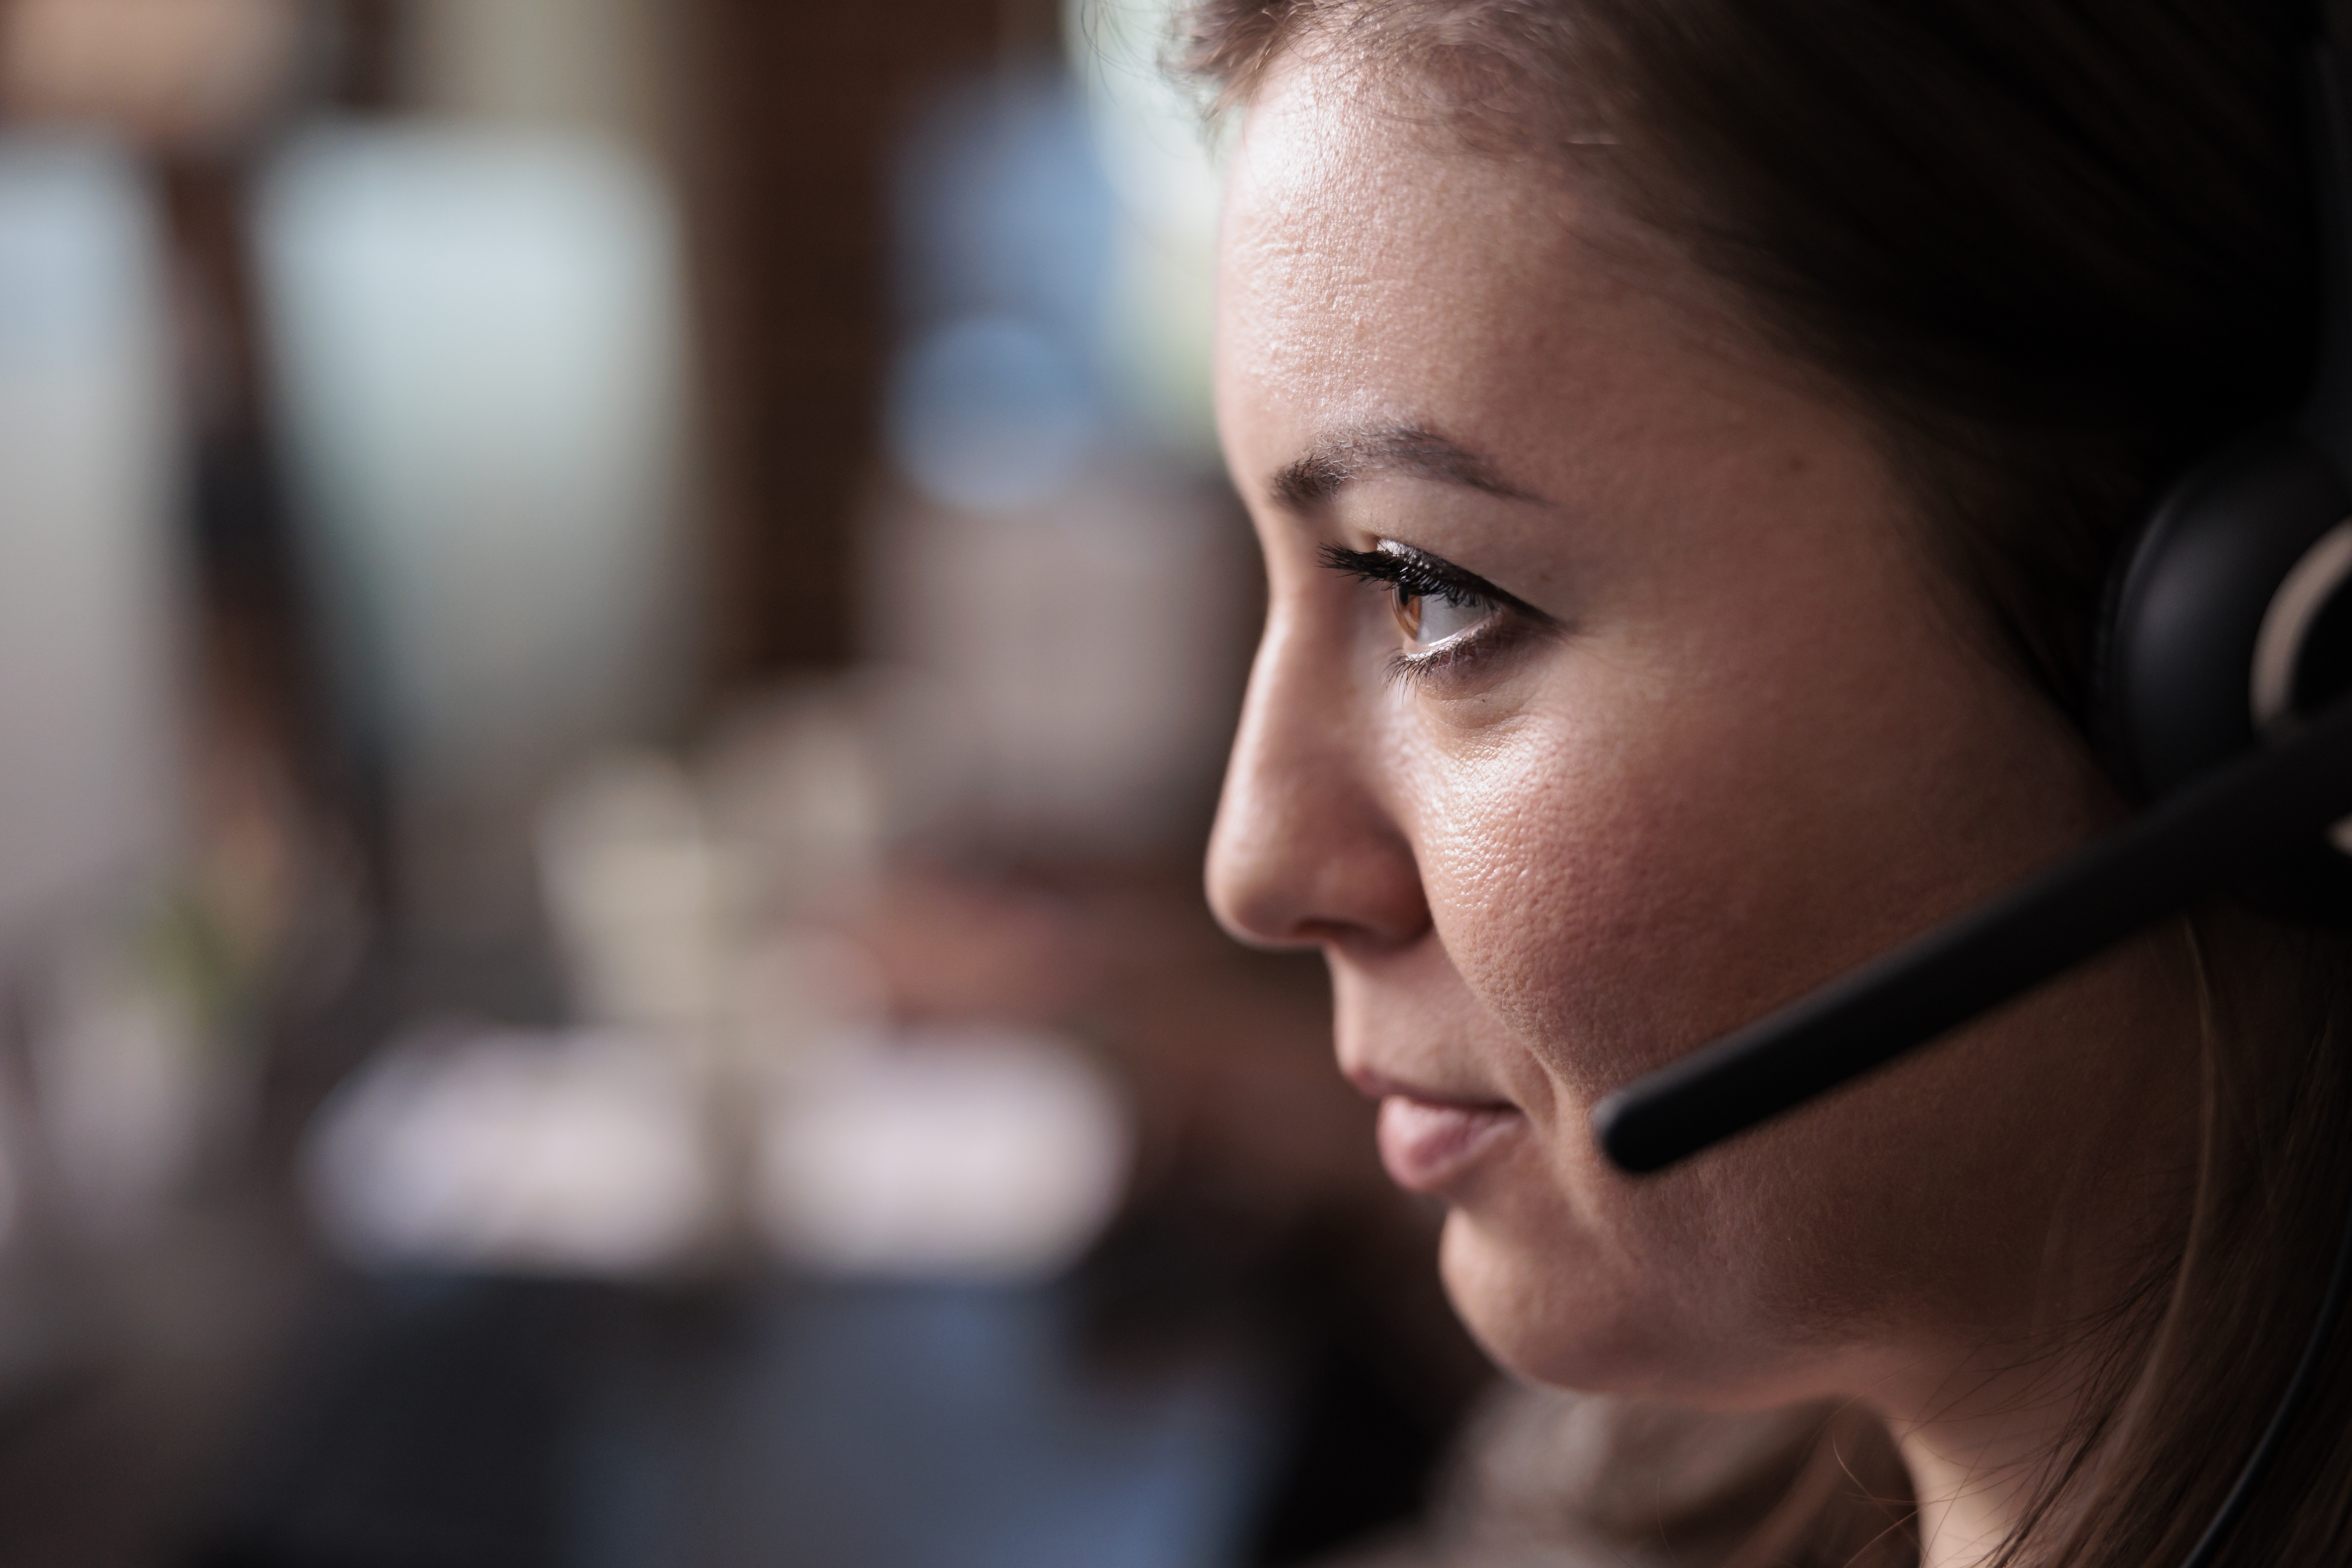 Telemarketing sales worker answering client call on headset